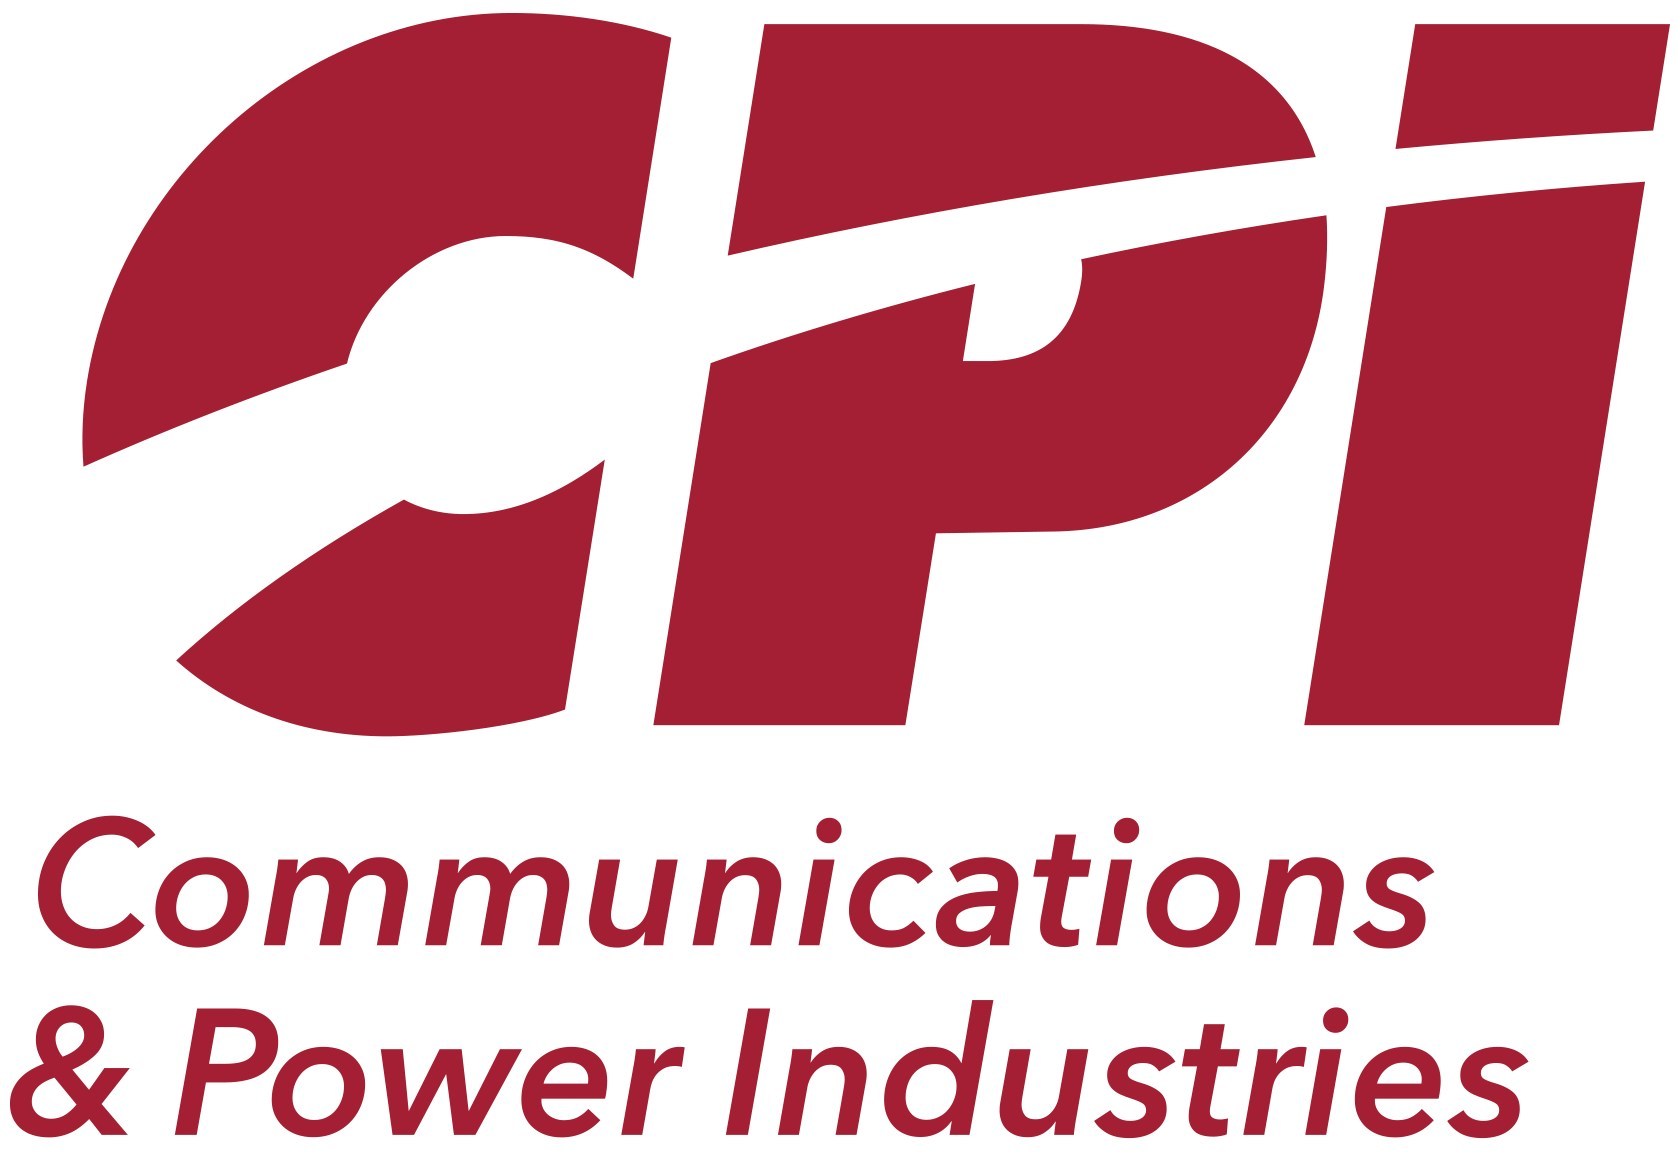 COMMUNICATIONS & POWER INDUSTRIES RECEIVES A MULTI-YEAR ORDER FROM ...